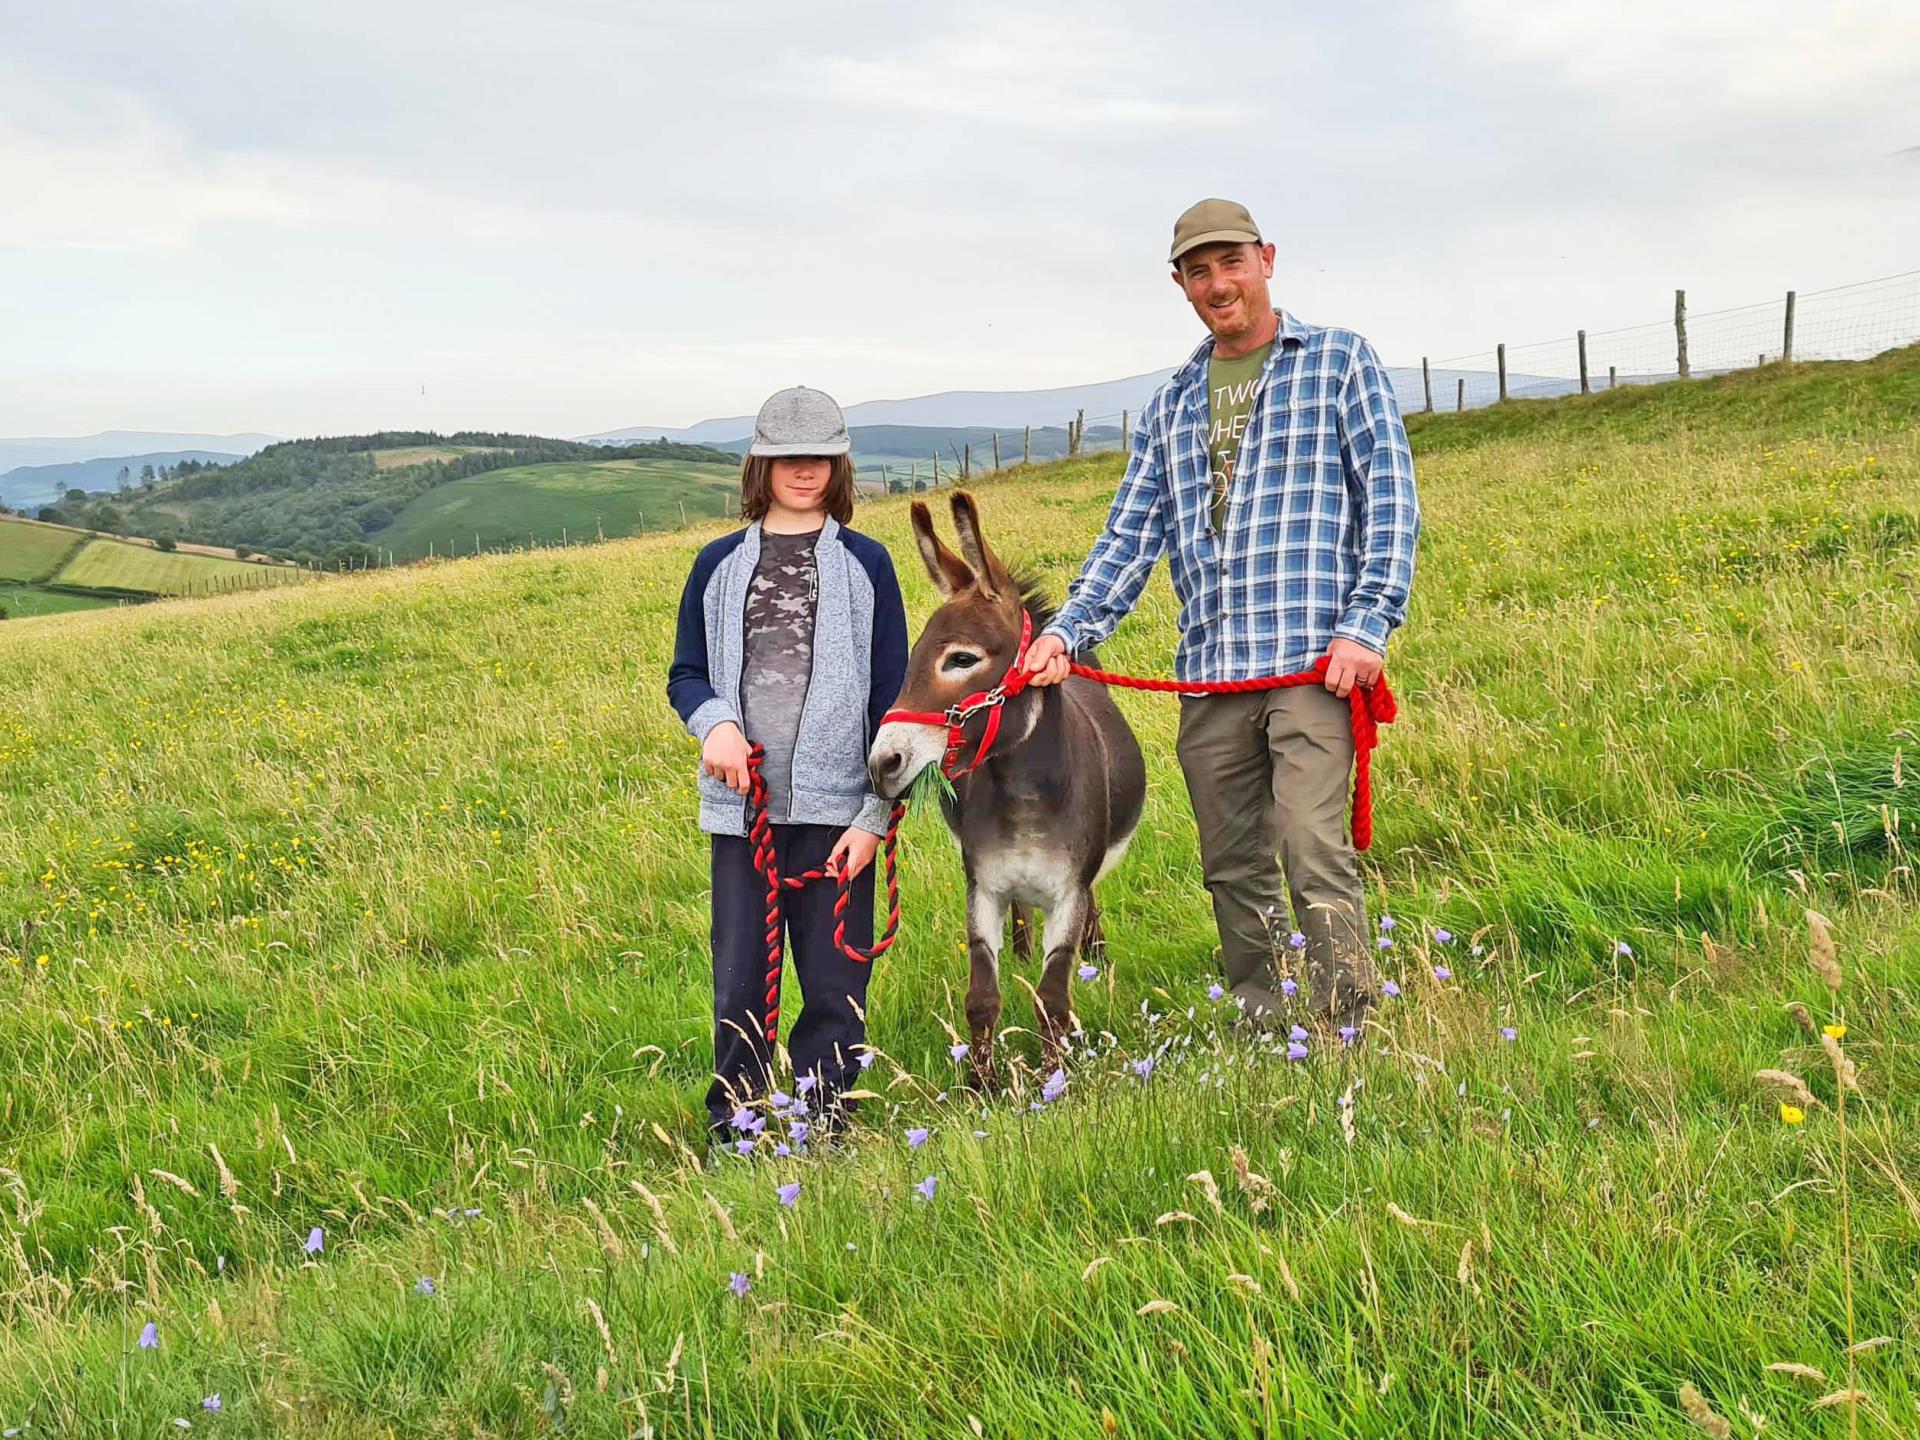 Father and son days out with animals in Wales